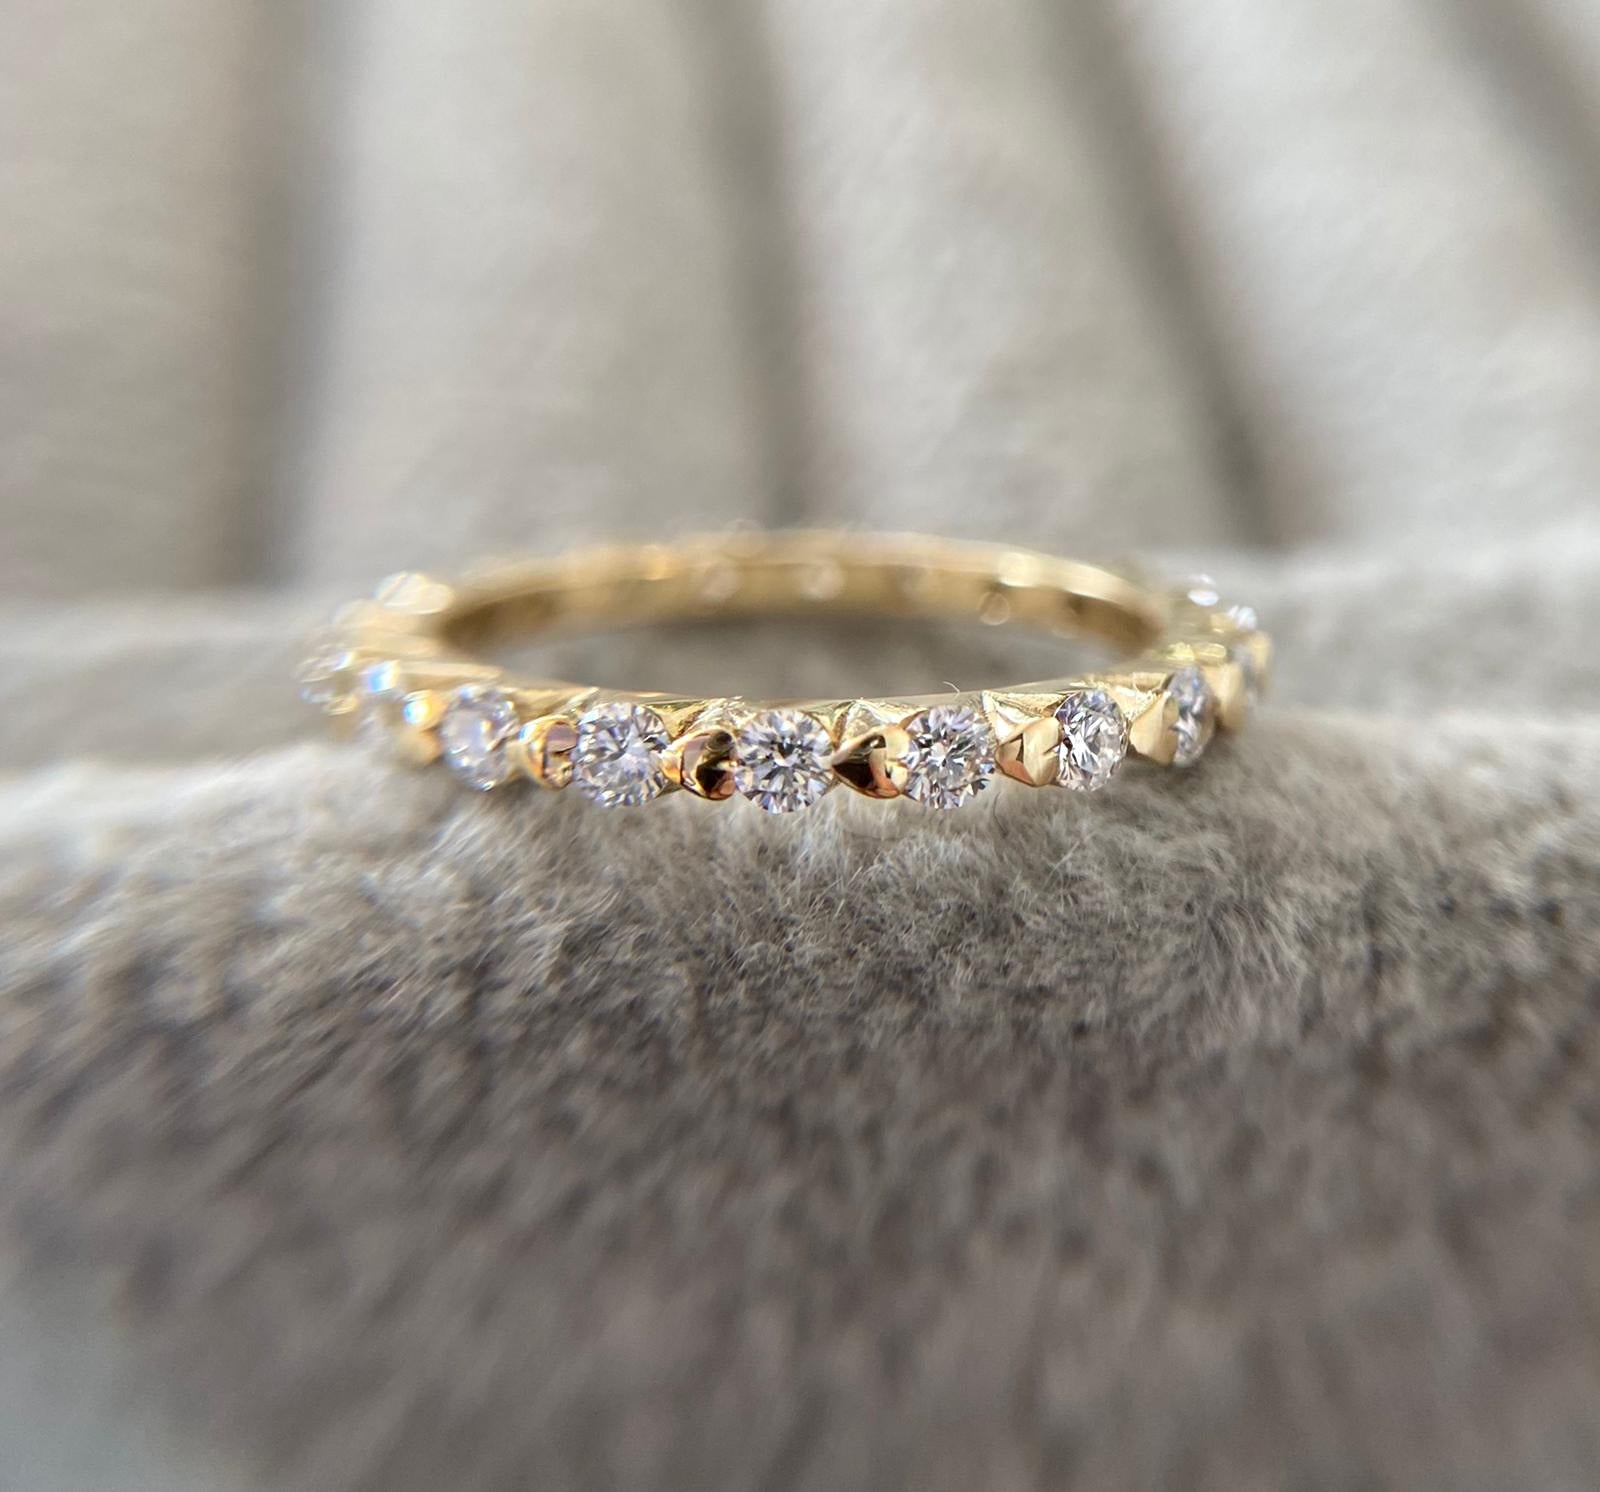 IN STOCK 18ct Yellow Gold Hearts and diamonds eternity ring